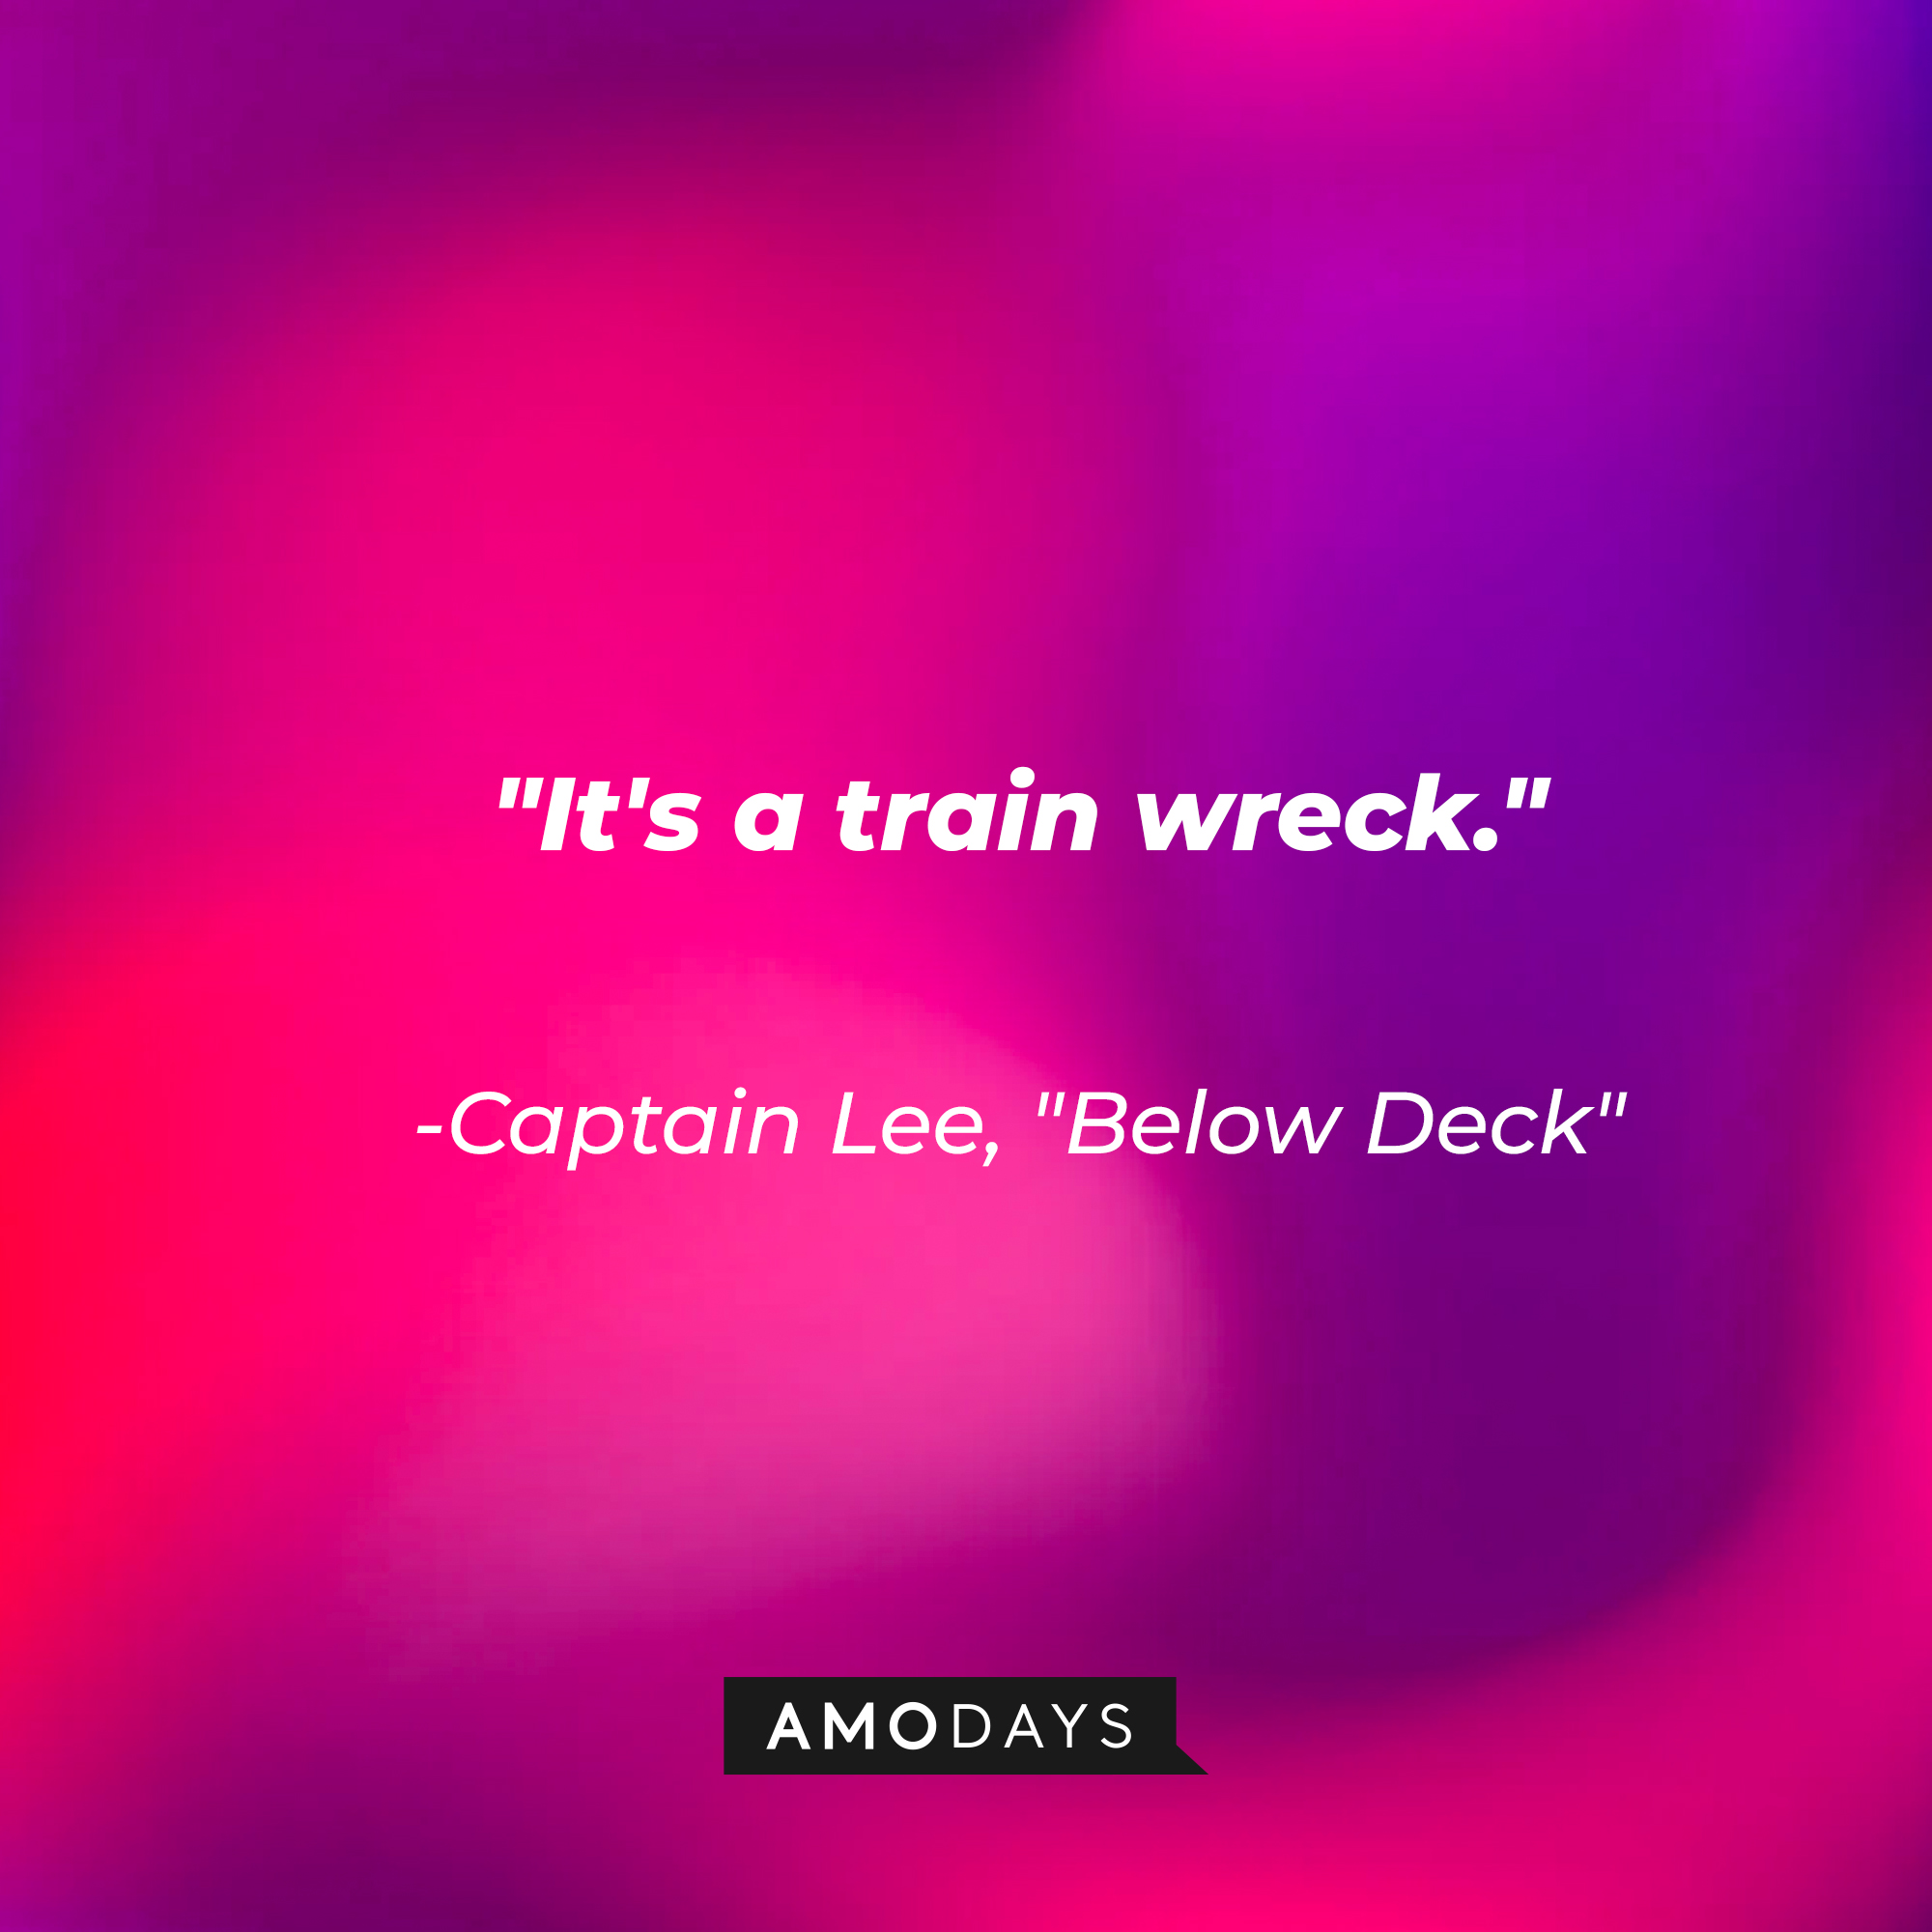 Captain Lee's quote from "Below Deck:" "It's a train wreck." | Source: AmoDays